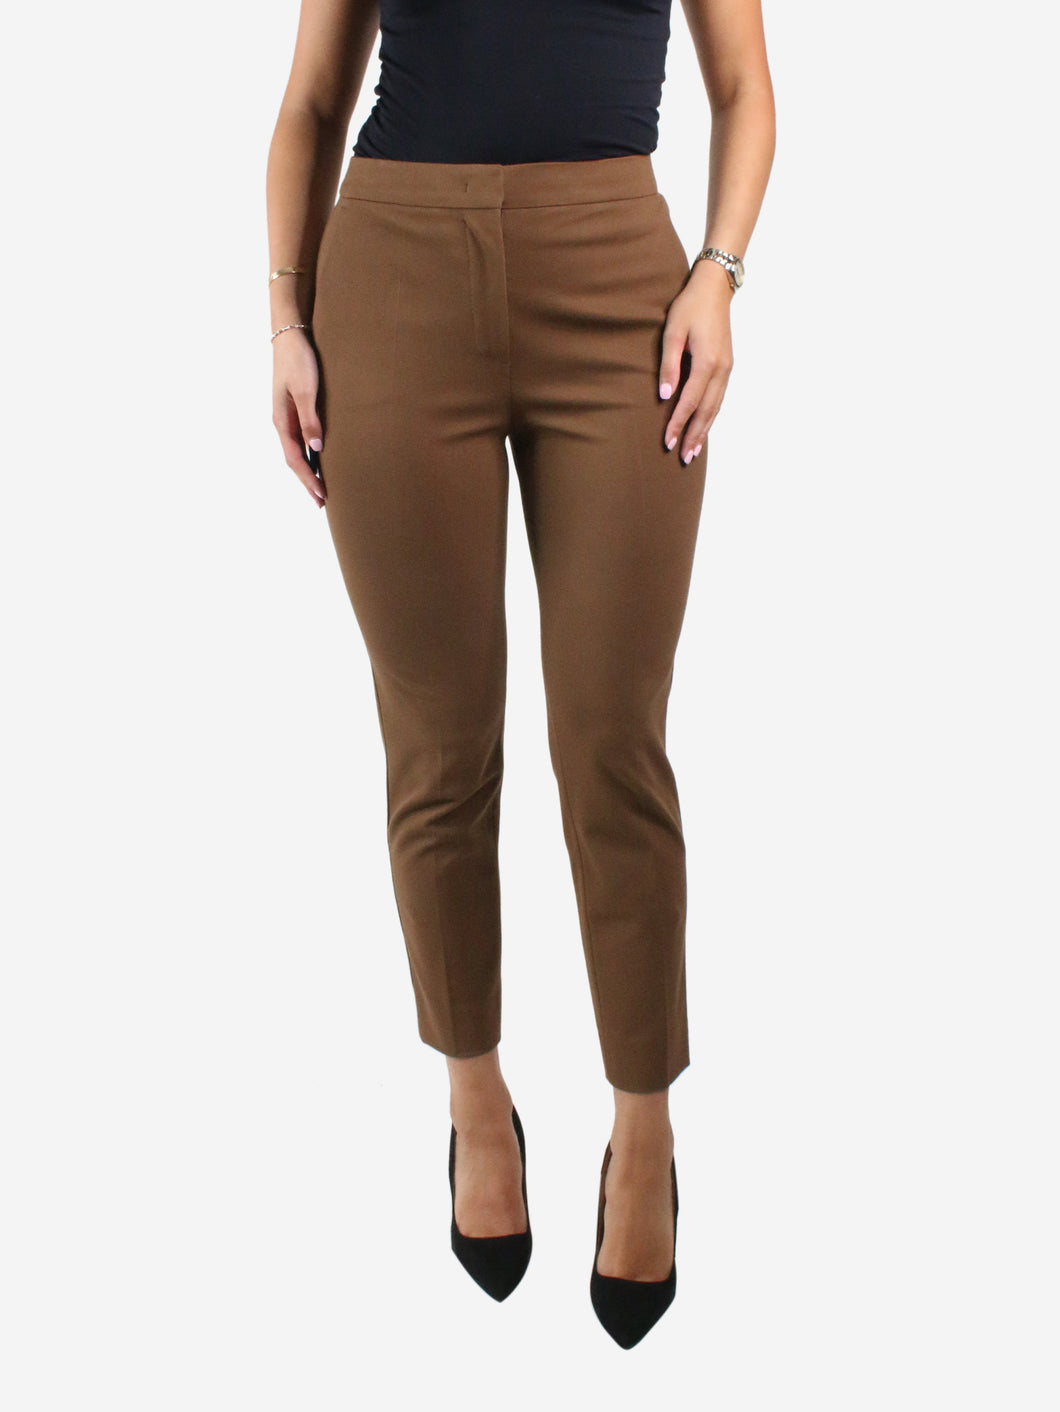 Brown tailored trousers - size UK 10 Trousers Max Mara 